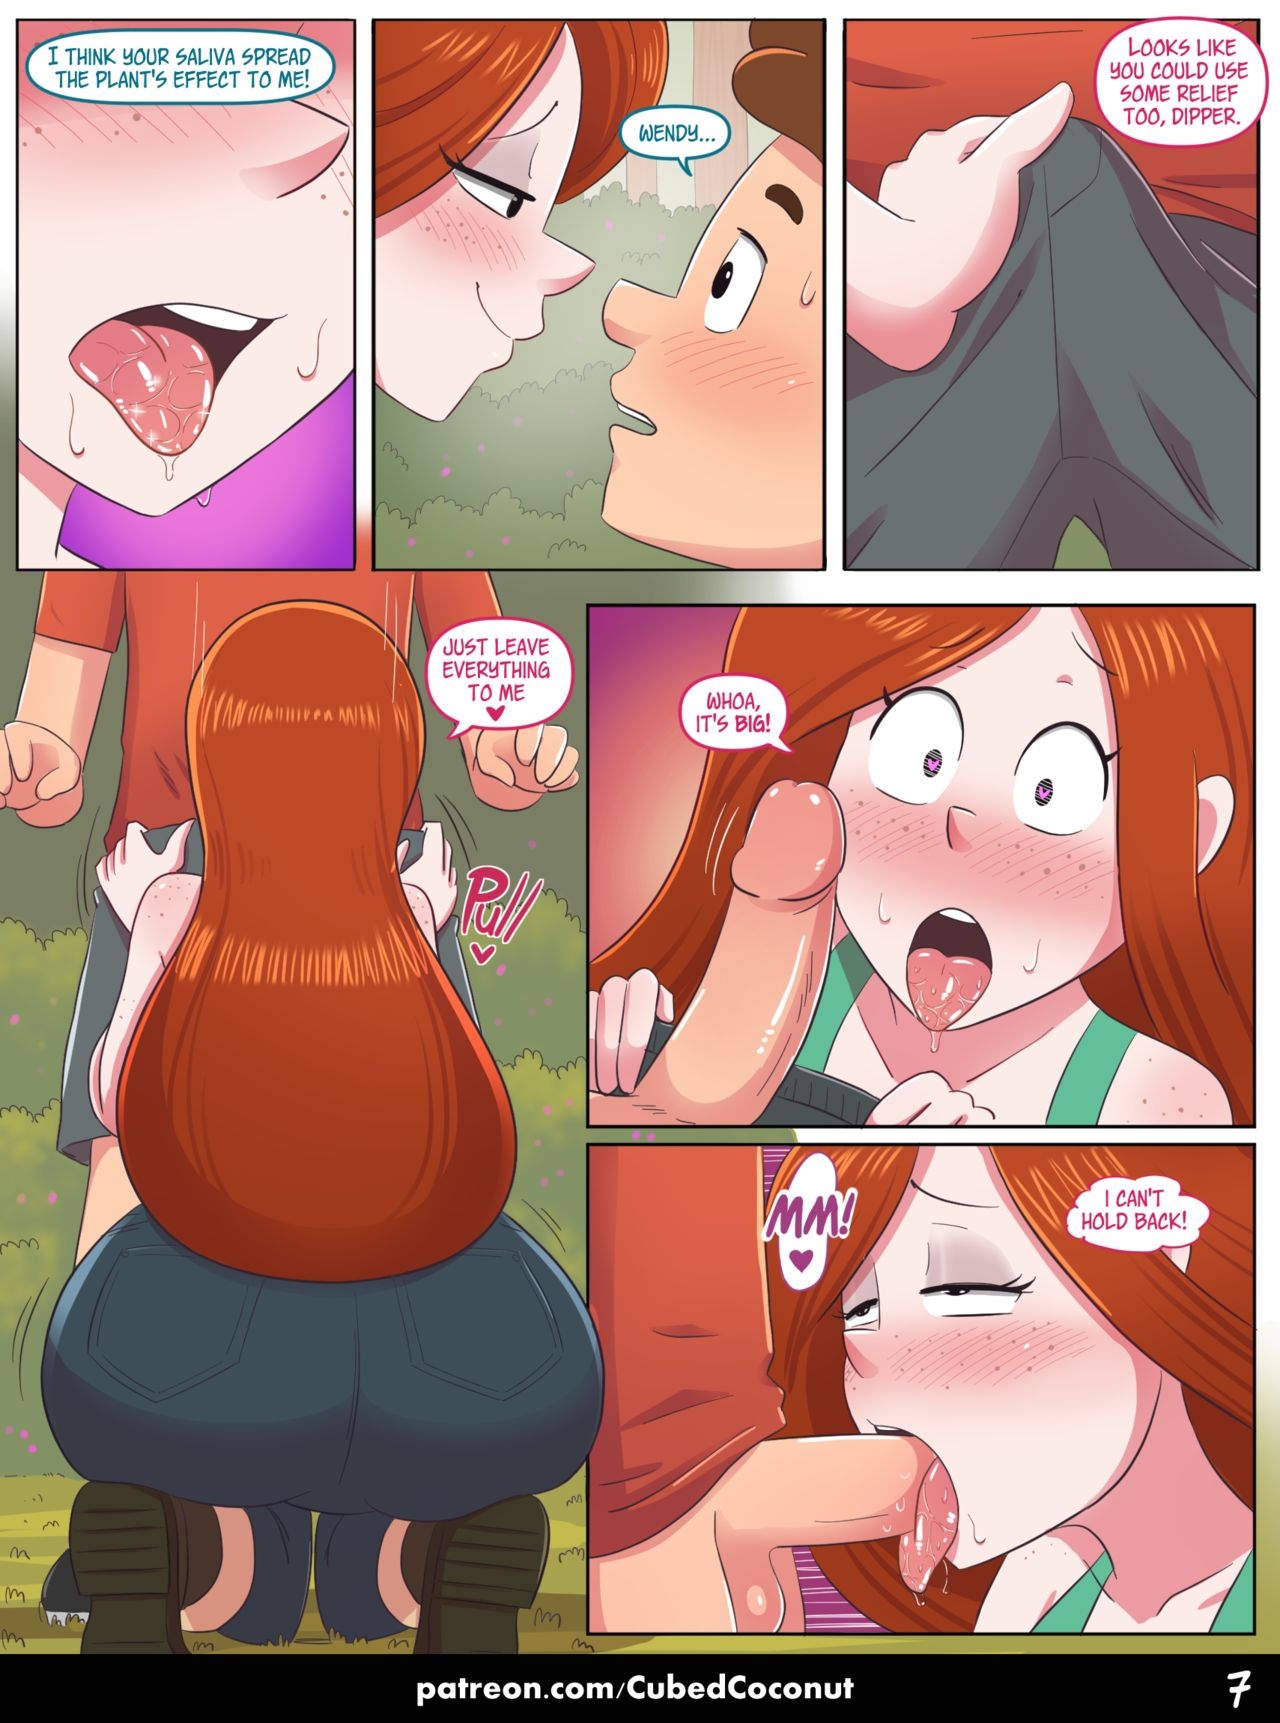 [Cubed Coconut] Wendy's Confession (Gravity Falls) 7